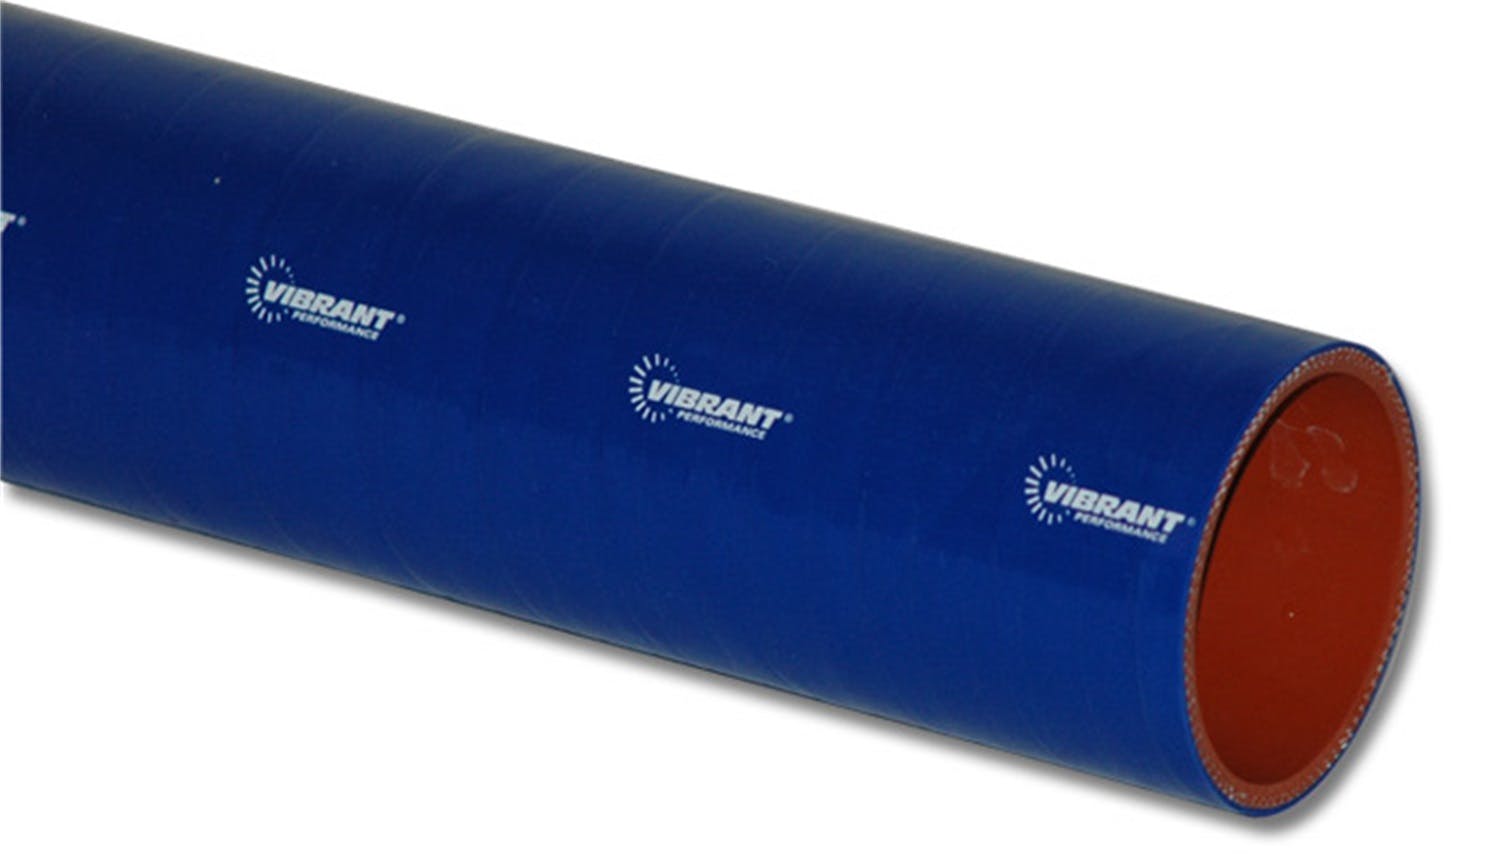 Vibrant Performance 27111B 4 Ply Silicone Sleeve, 2.5 inch I.D. x 12 inch Long - Blue